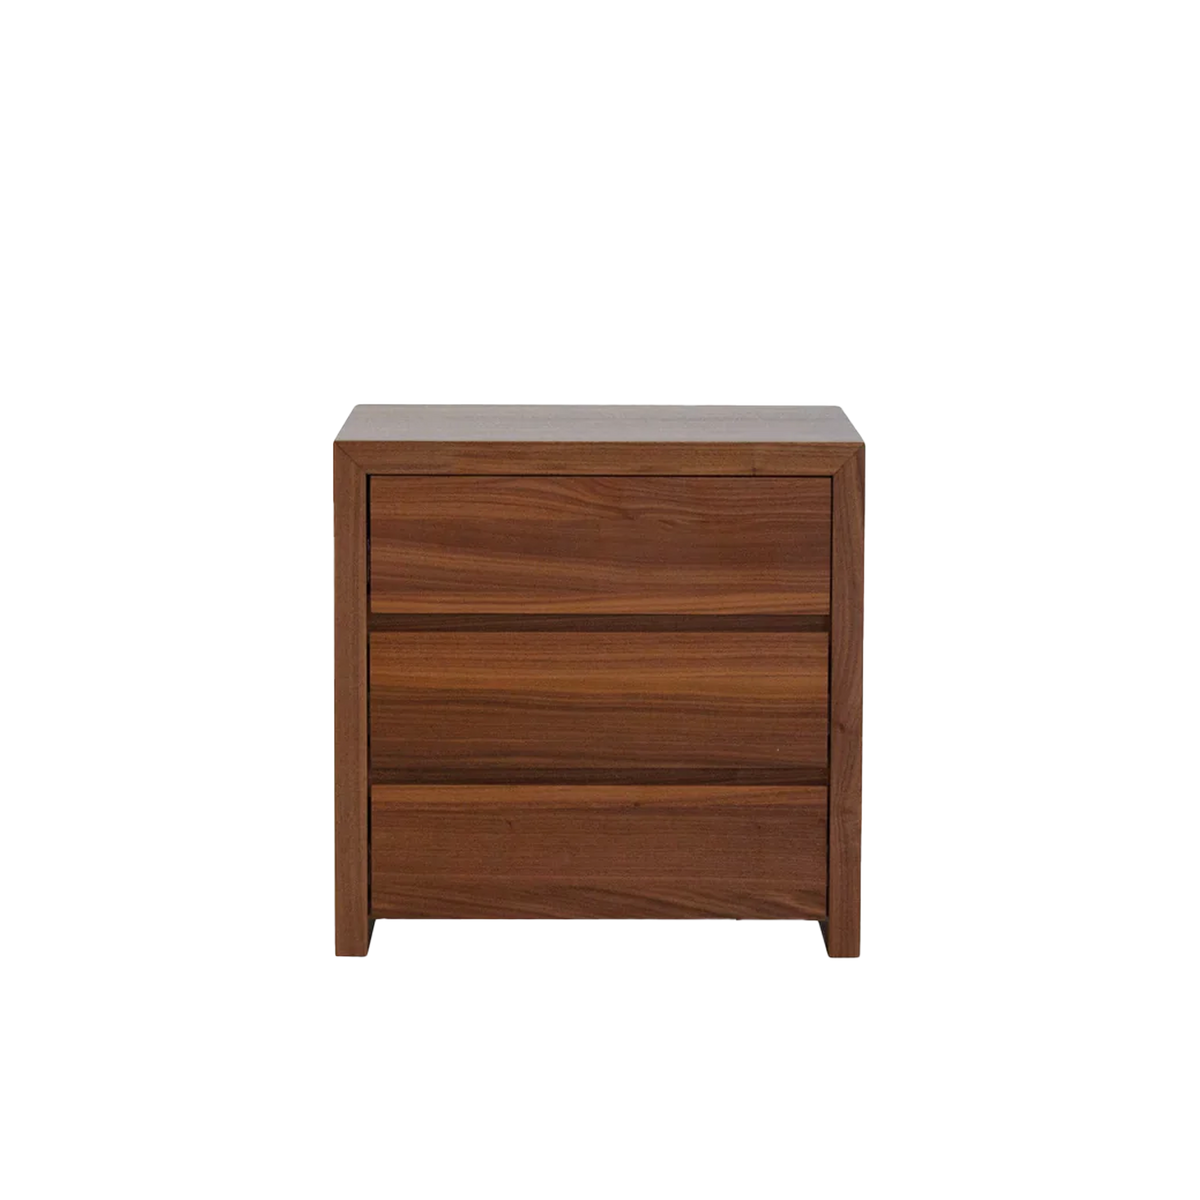 Displaying the rich brown tones of walnut wood, the Ajax Nightstand brings style and functionality to the bedroom.